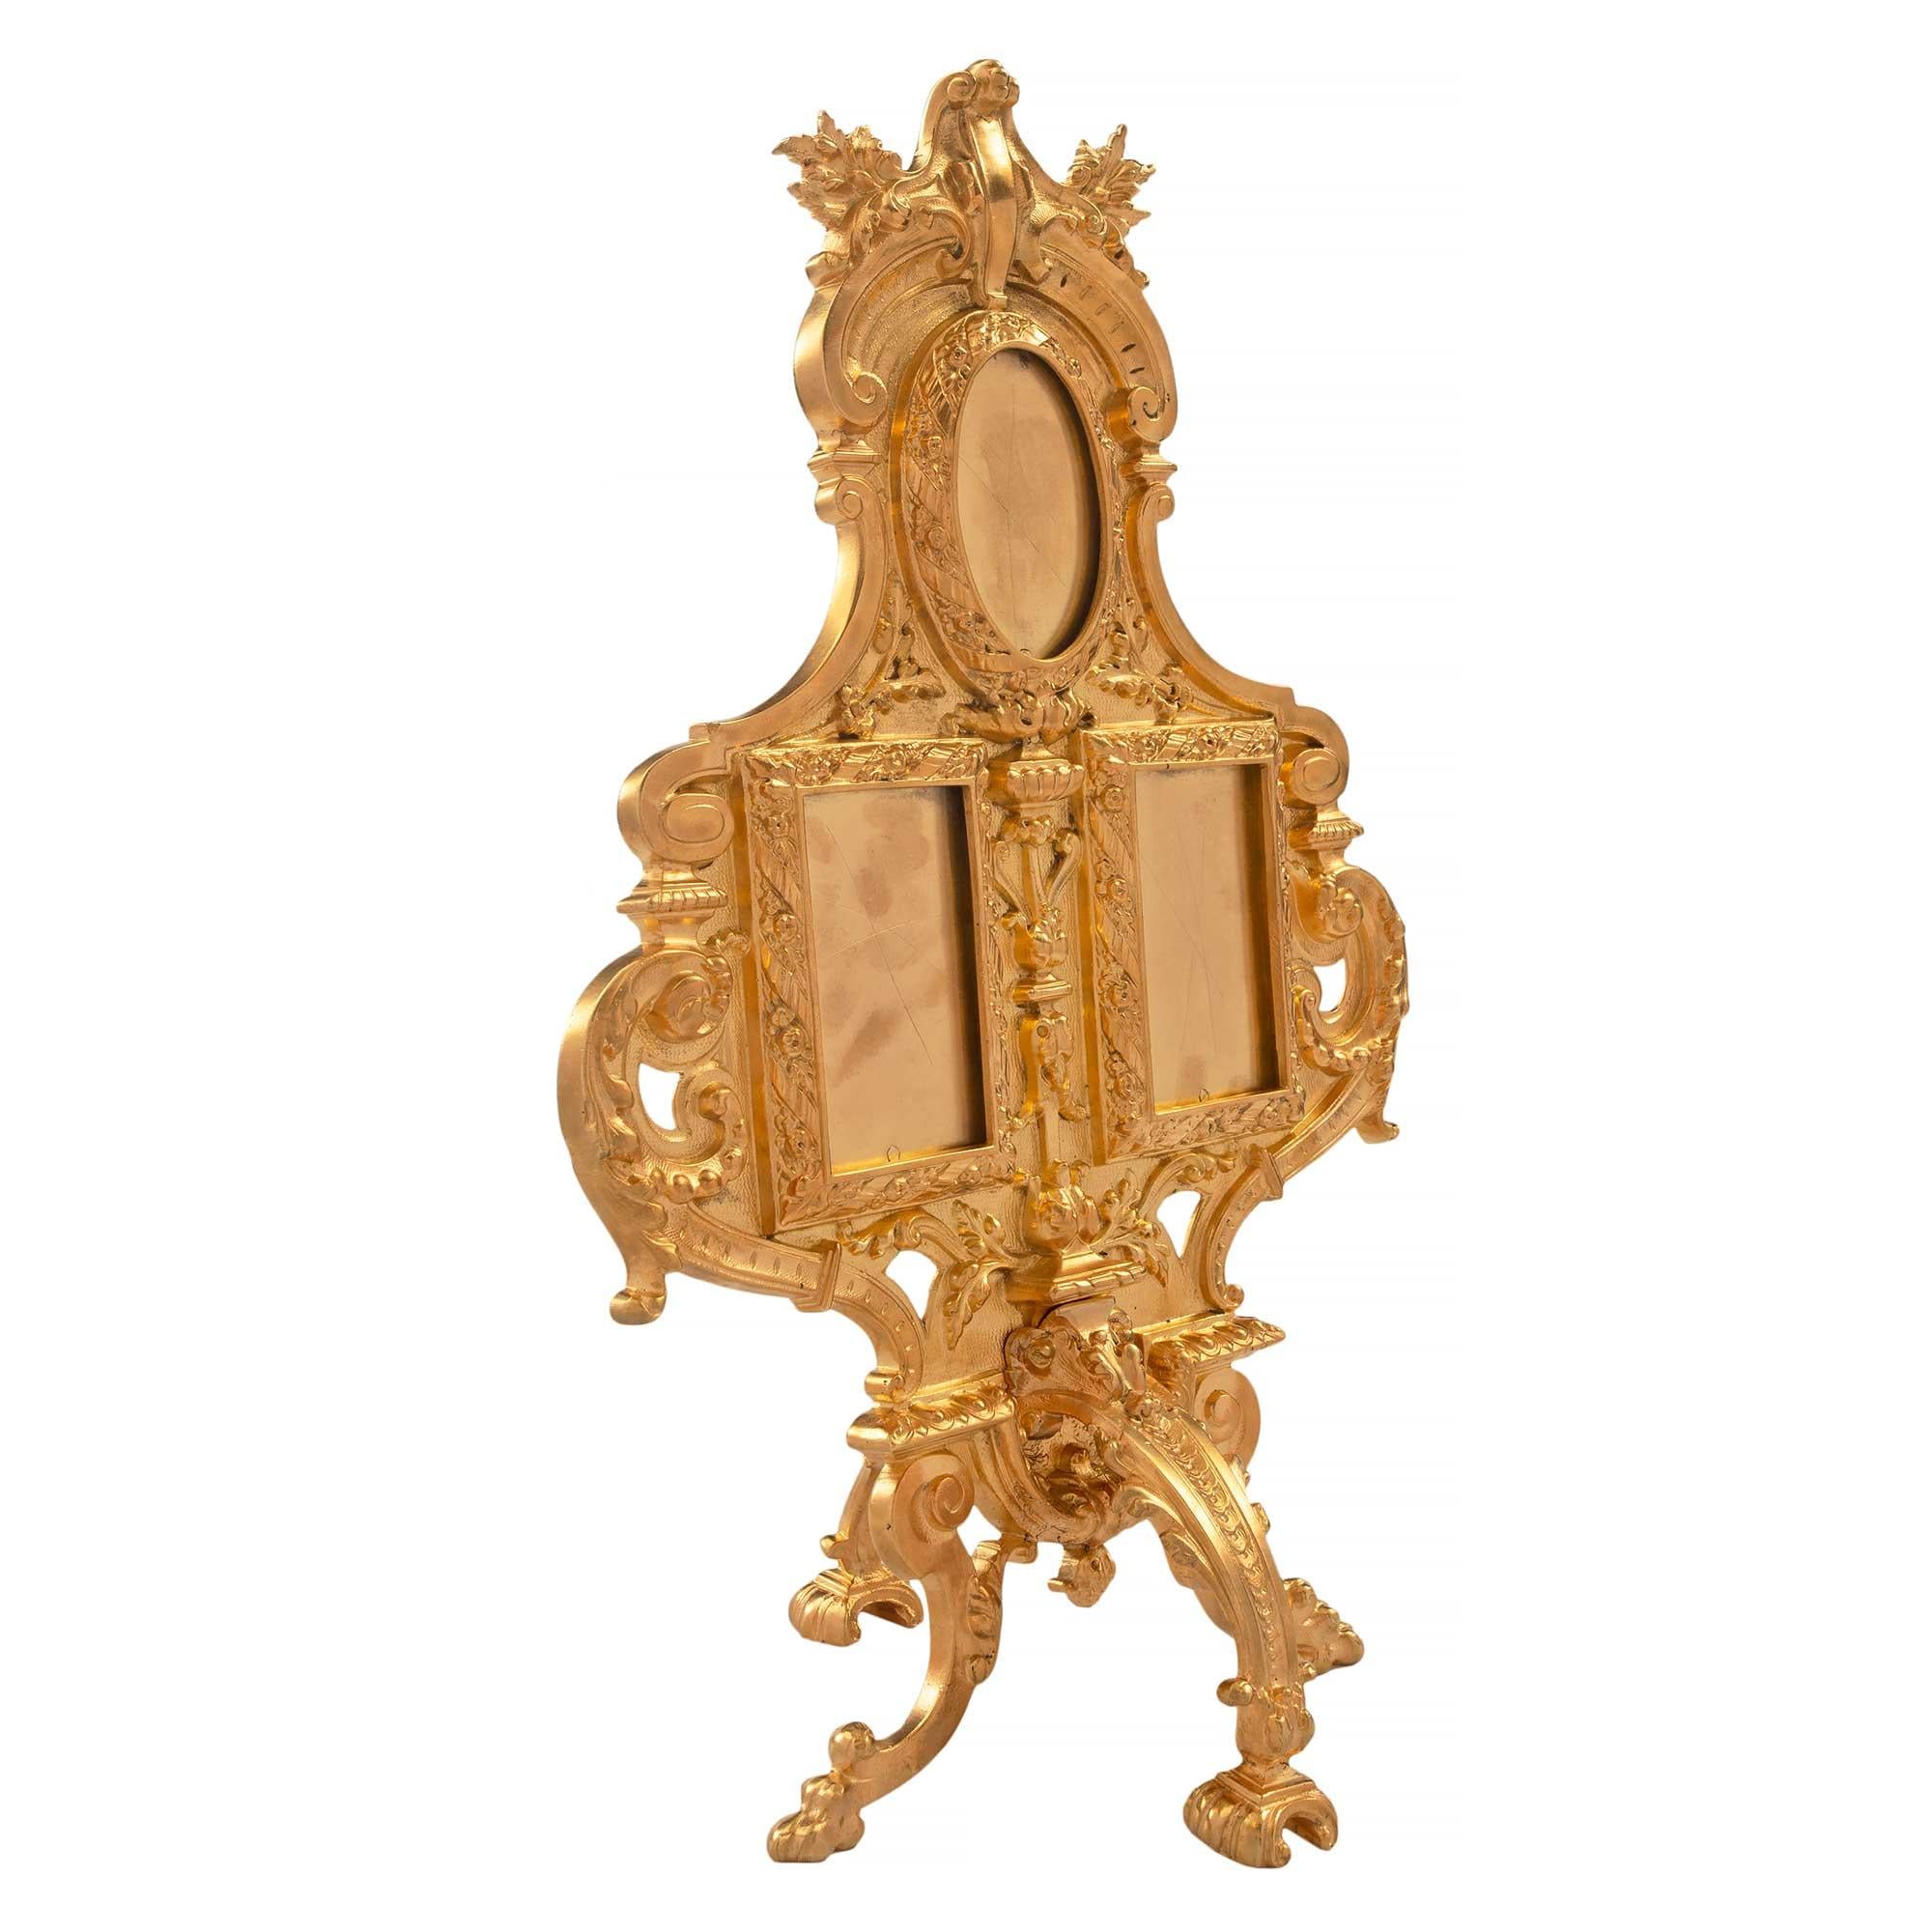 A uniquely shaped and most elegant French 19th century Louis XVI ormolu frame, that accommodates three pictures. The frame is raised by four curved legs with a 'Coeur de Rai' design. The two rectangular shaped frames are flanked by 'C' scrolled